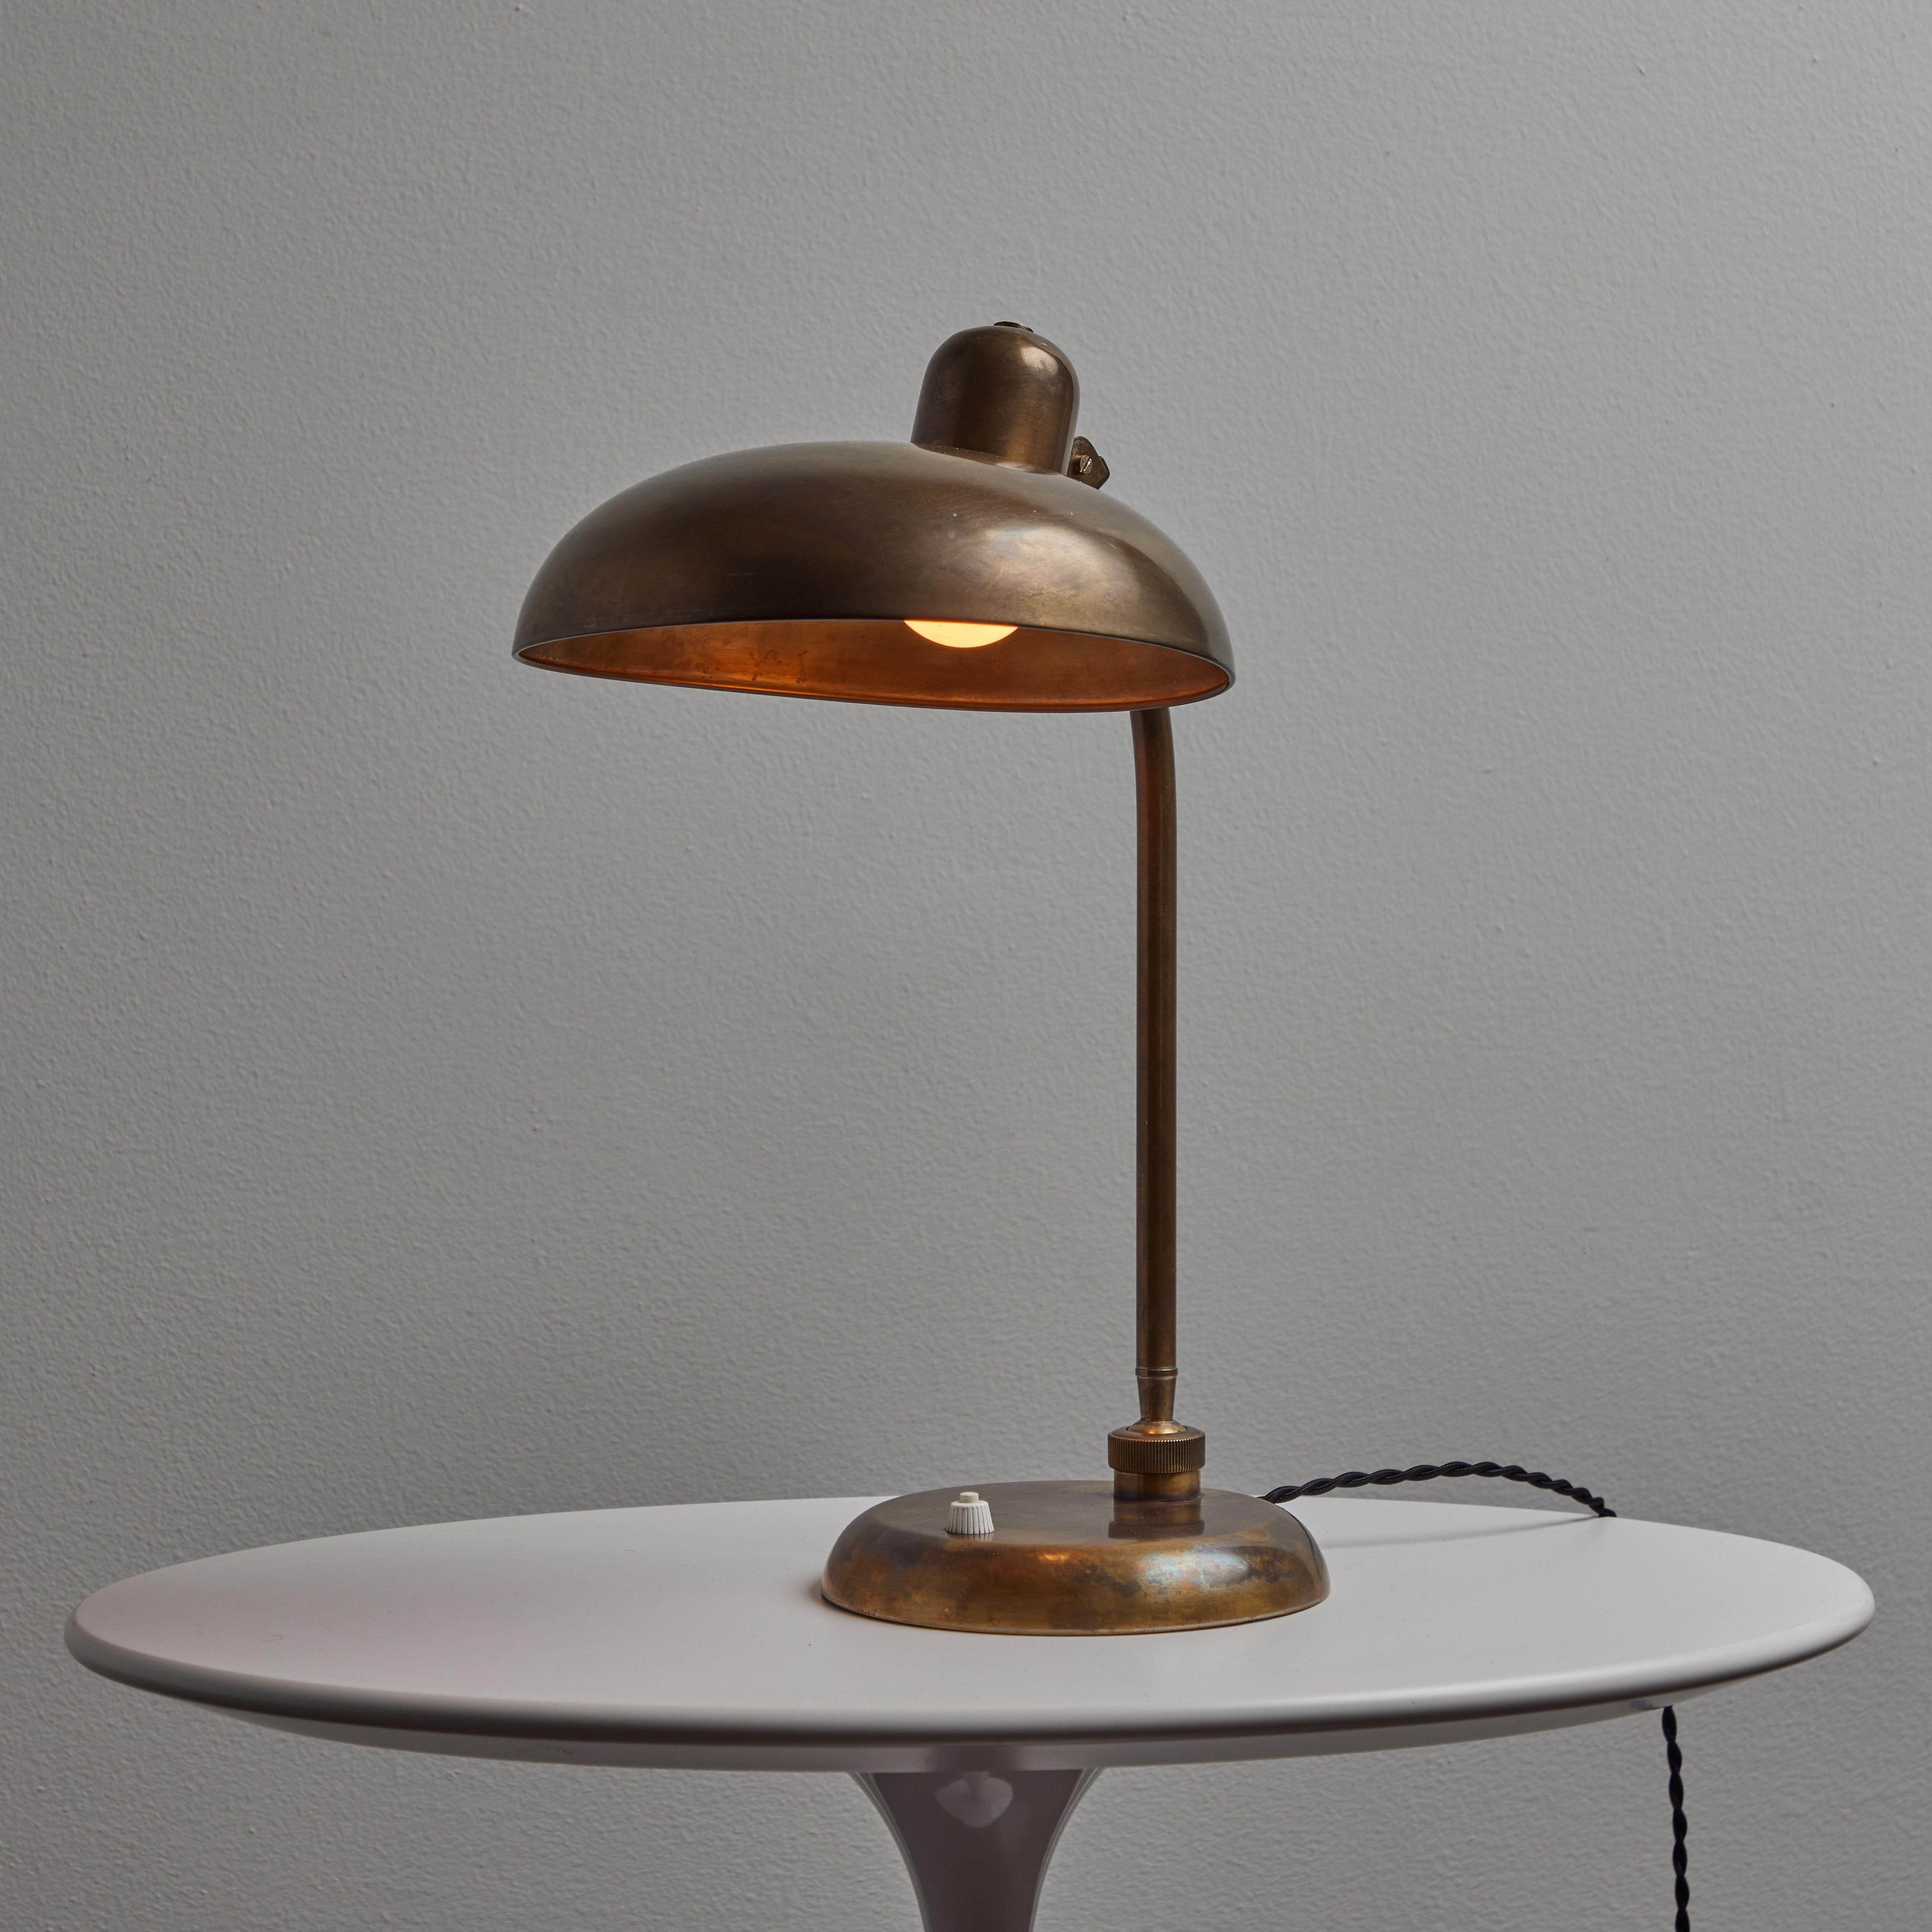 1940s Giovanni Michelucci Patinated Brass Ministerial Table Lamp for Lariolux For Sale 1